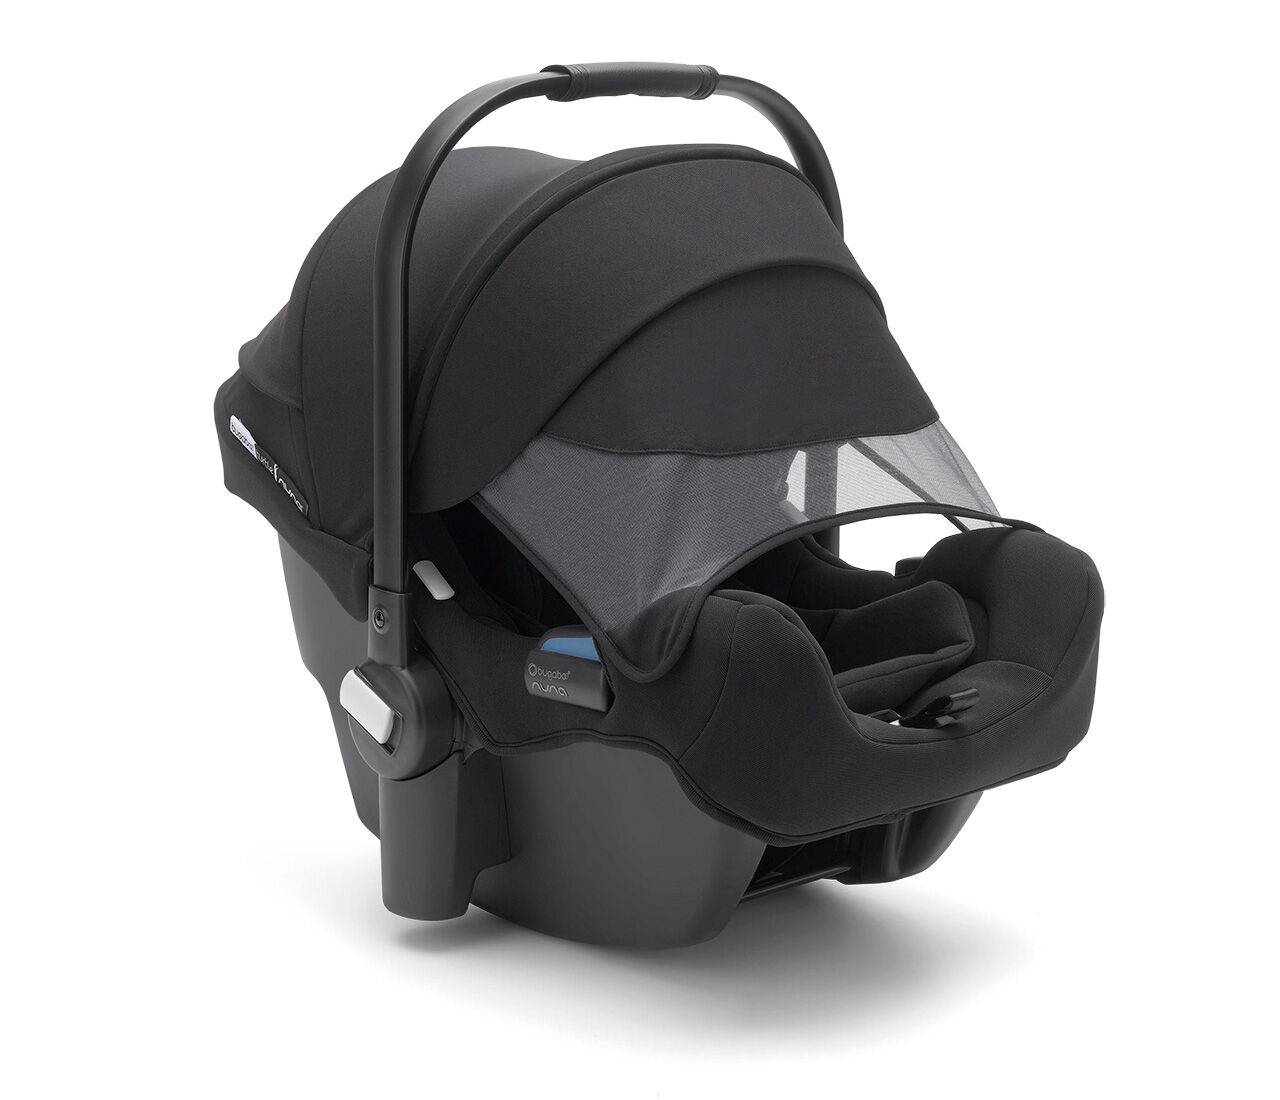 bugaboo and car seat